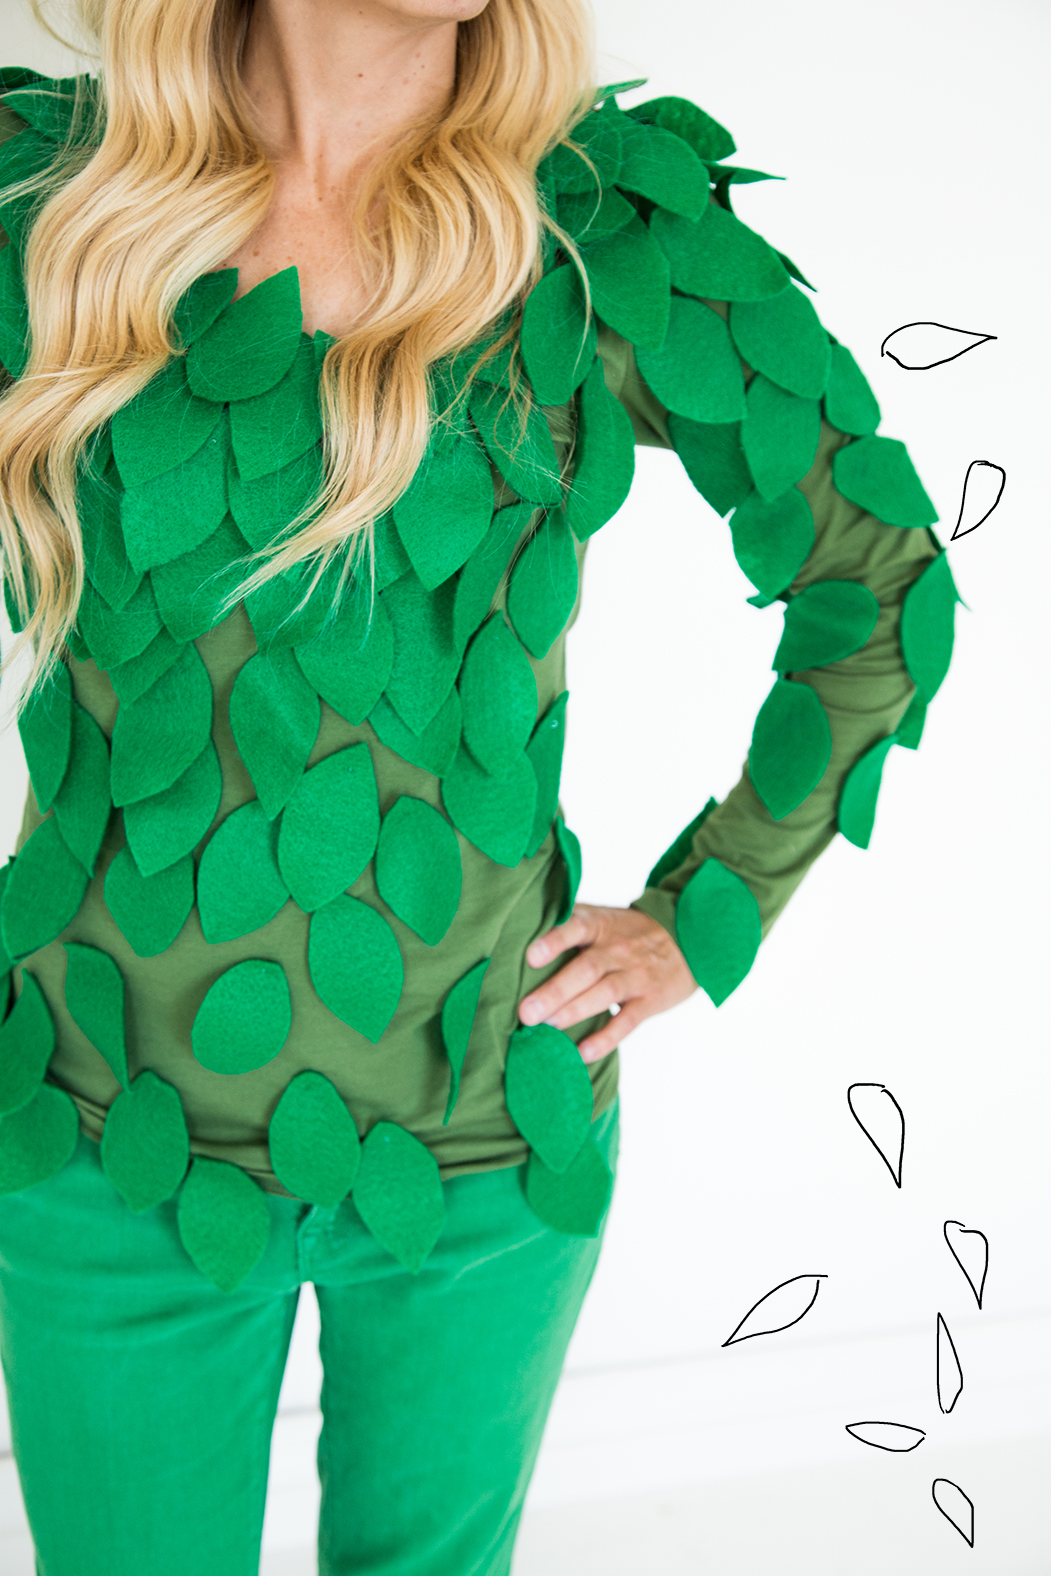 The Giving Tree Halloween costumes for parent and child along with a coordinating trick-or-treat bag